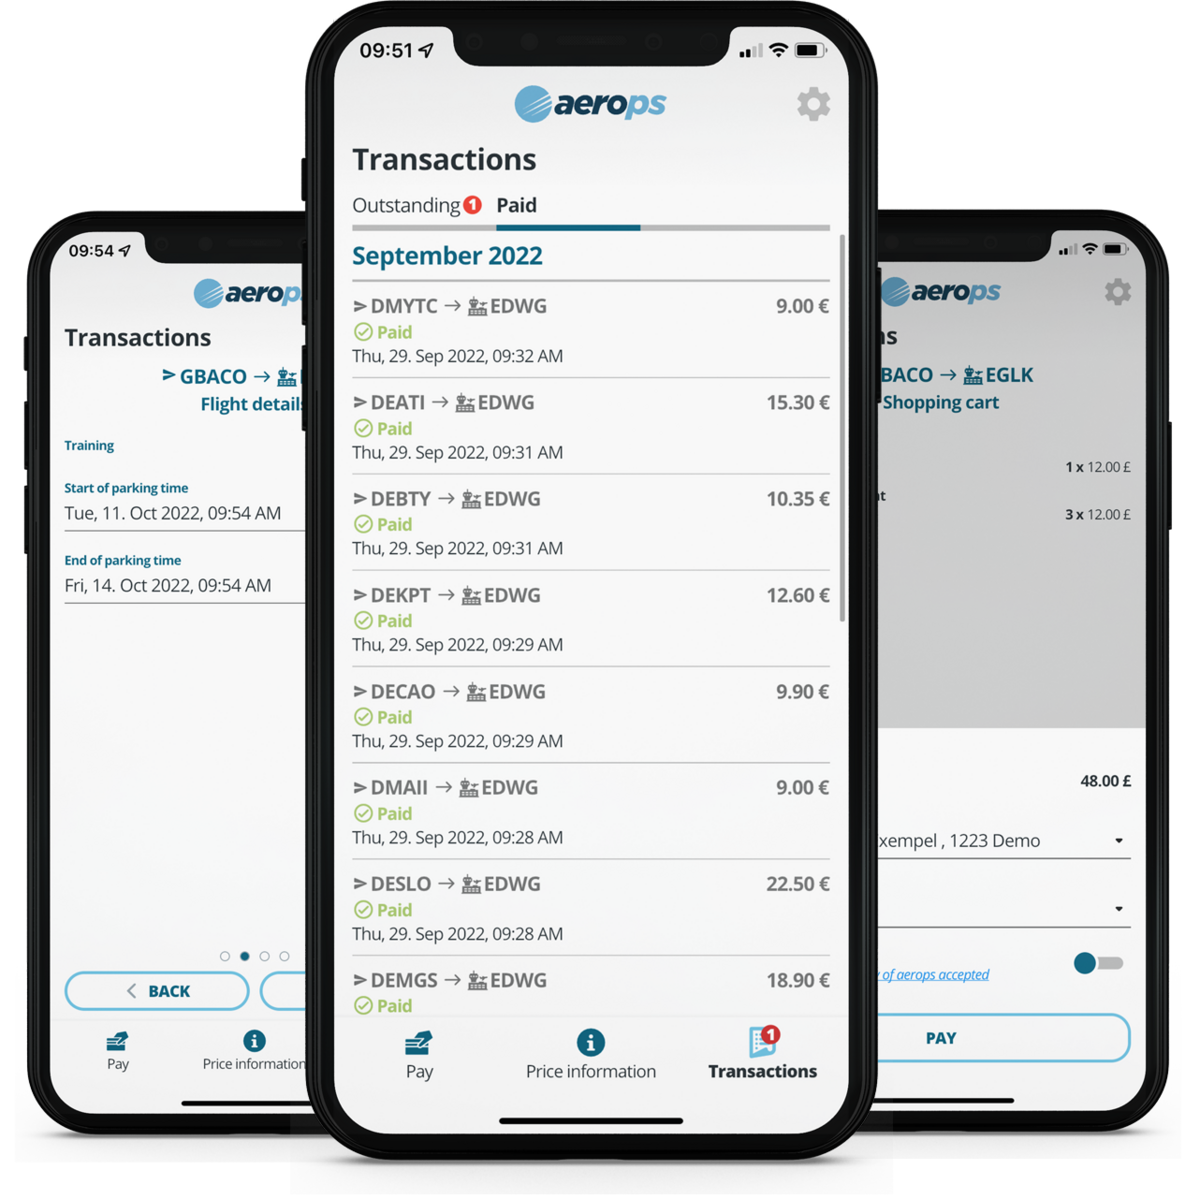 aerops is available at many international airports